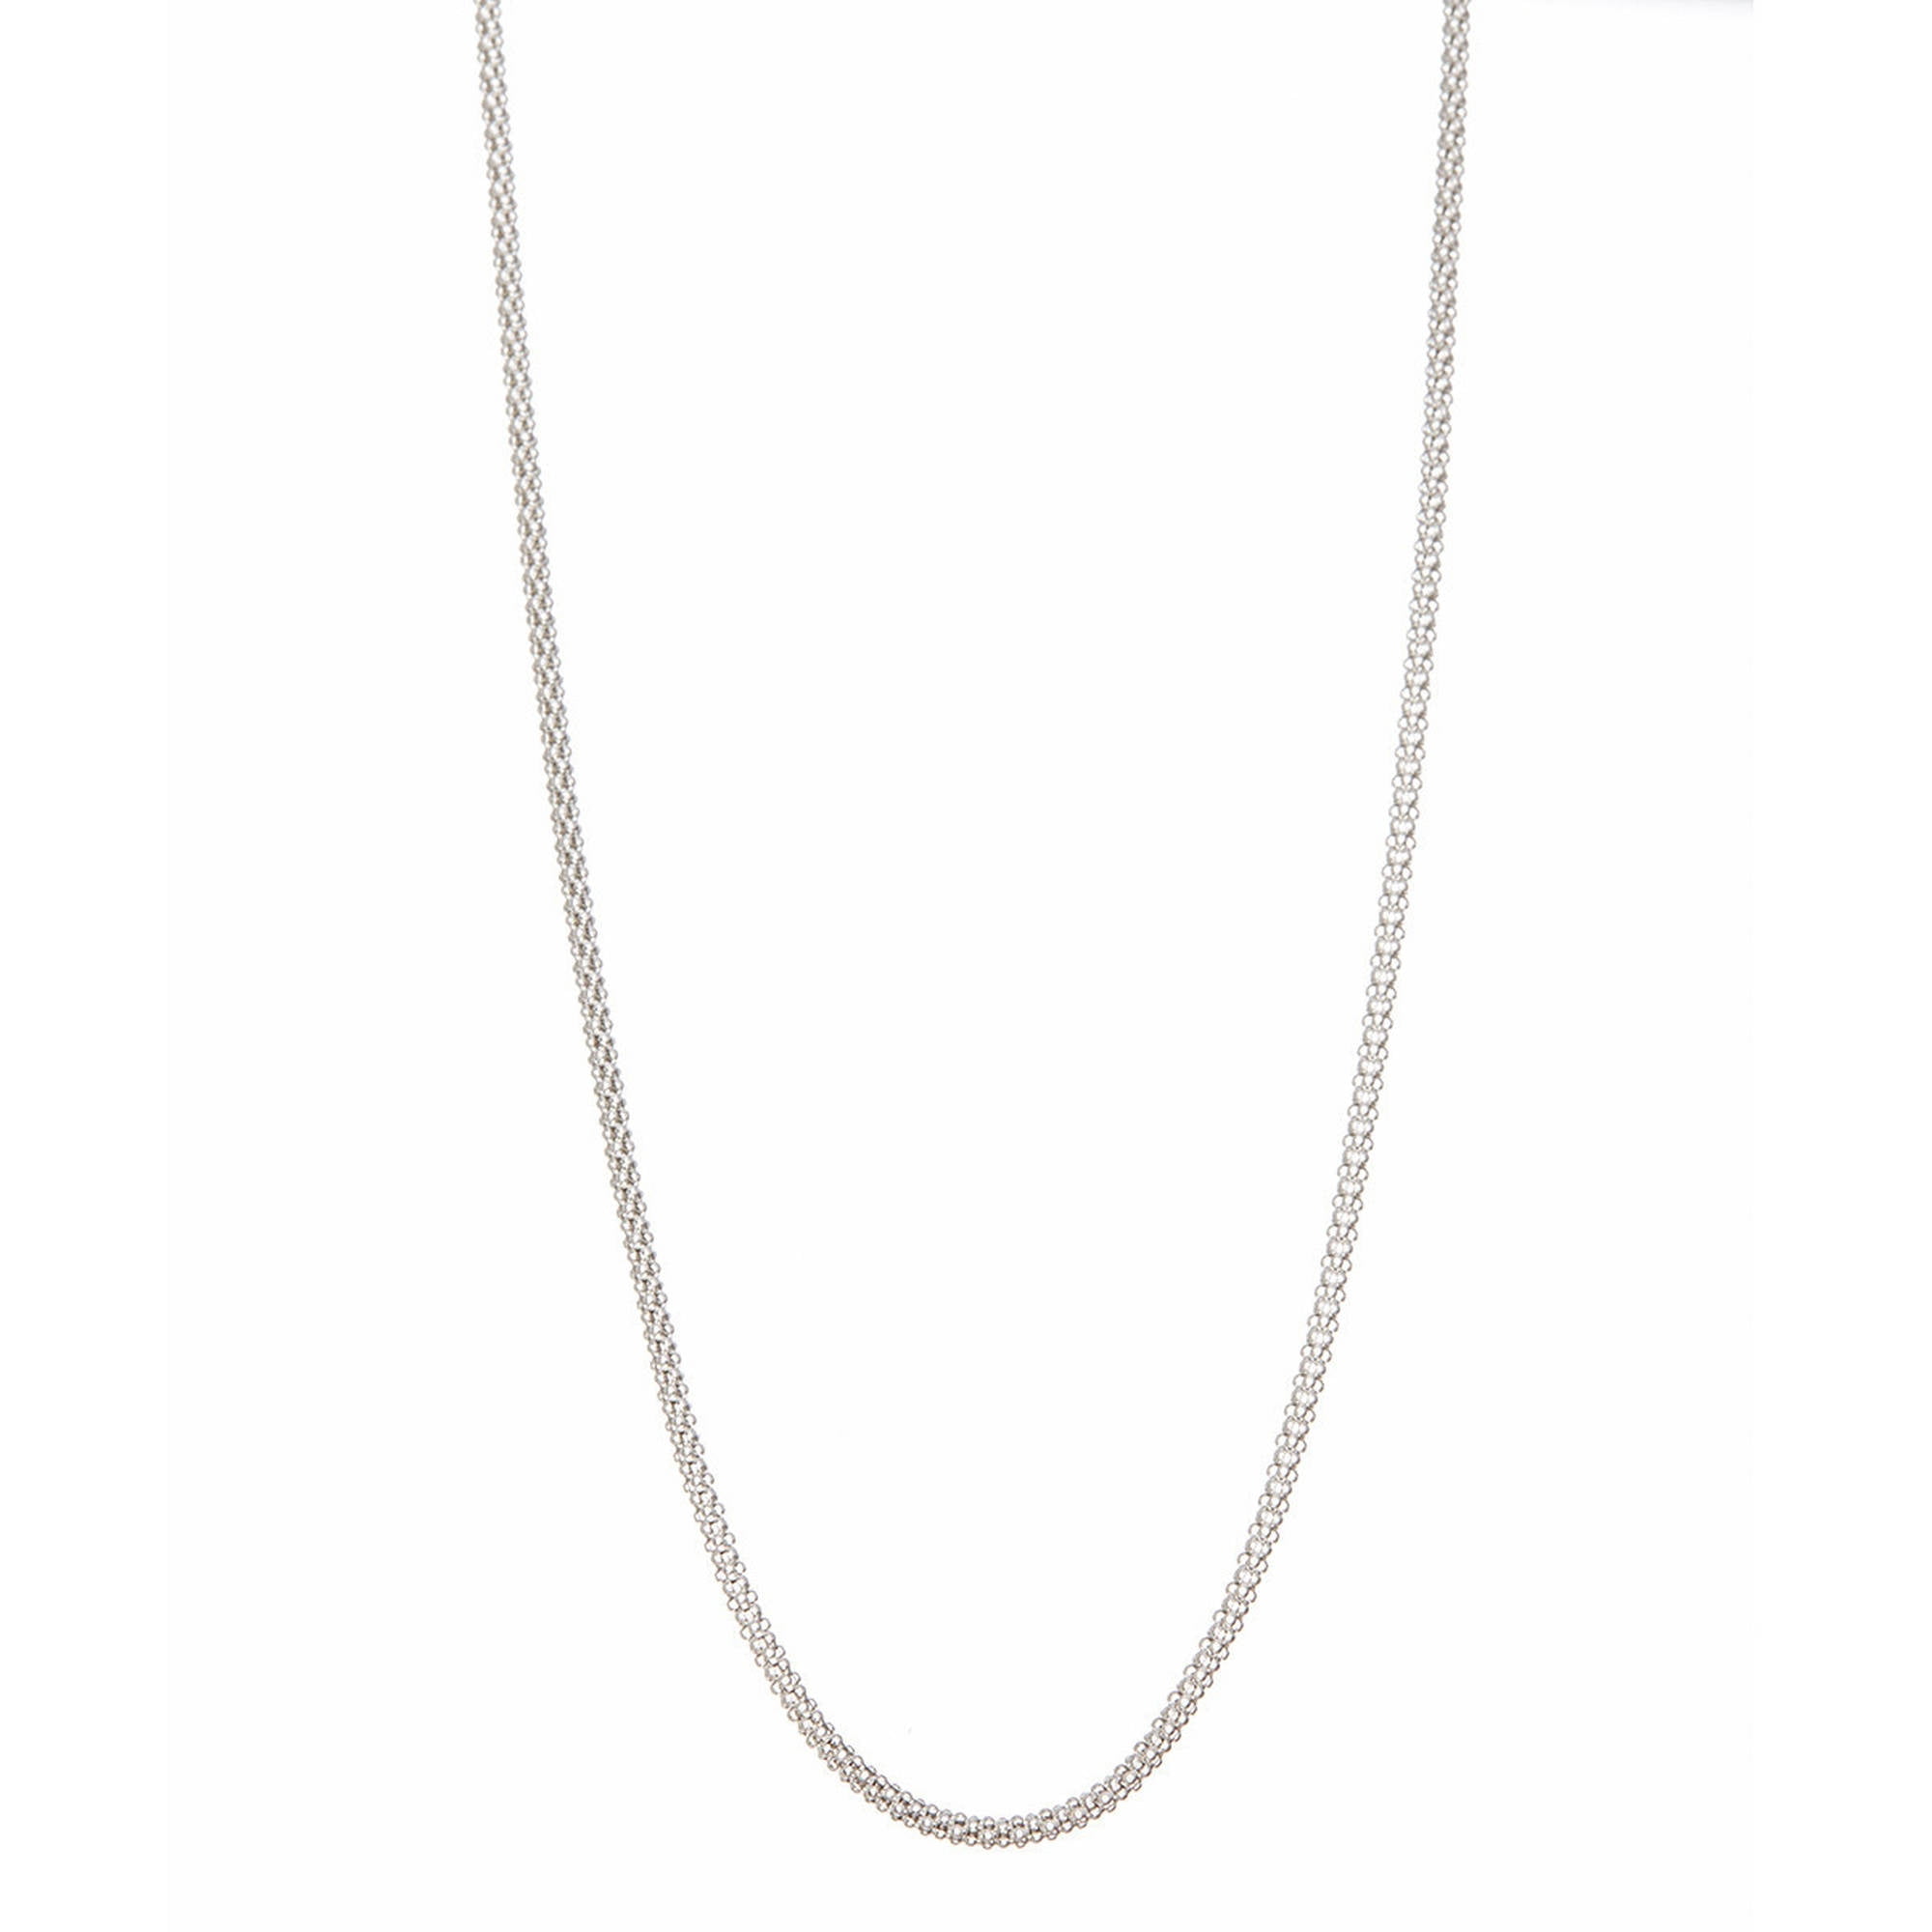 1 51 36. Wide Chain Necklace. Womens Chain Necklace.